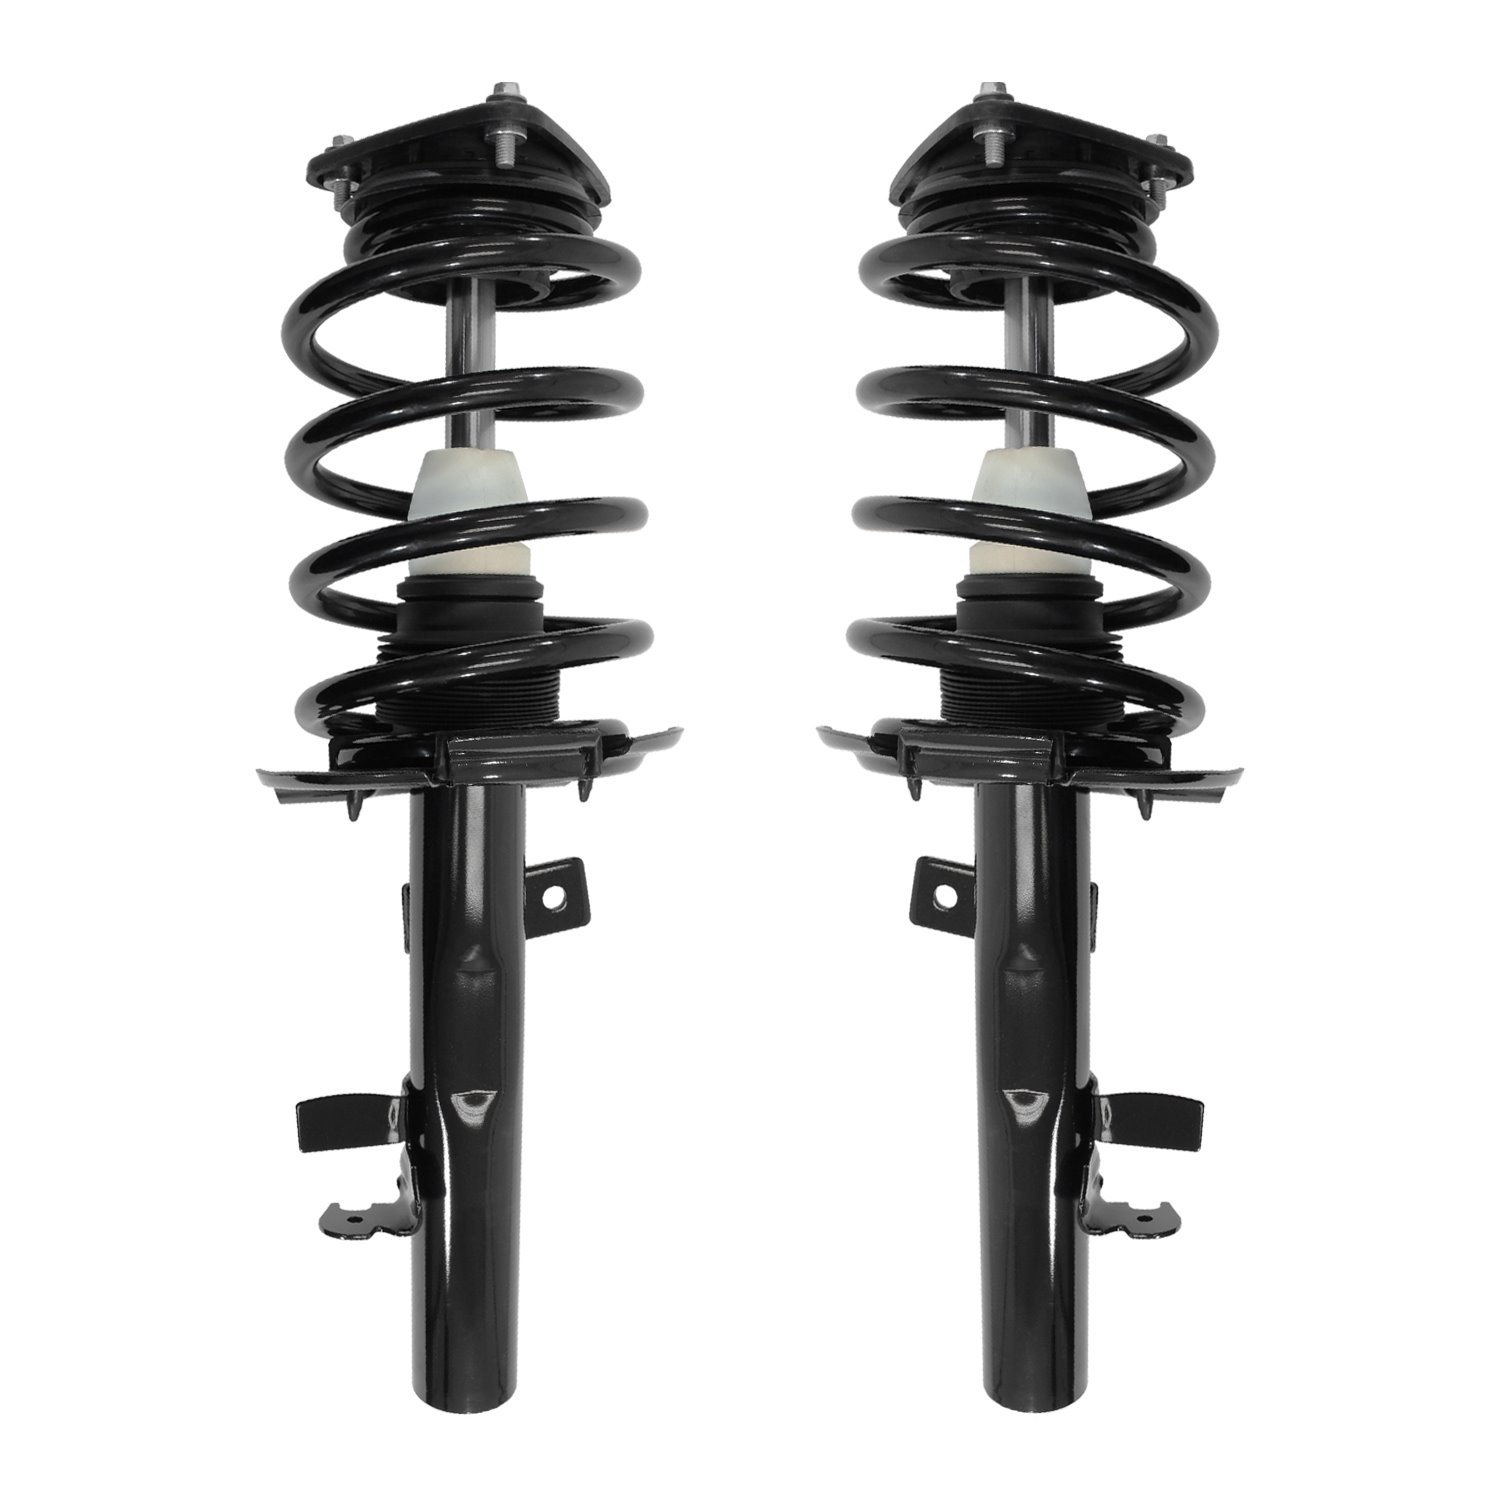 2-13311-13312-001 Suspension Strut & Coil Spring Assembly Set Fits Select Lincoln MKC